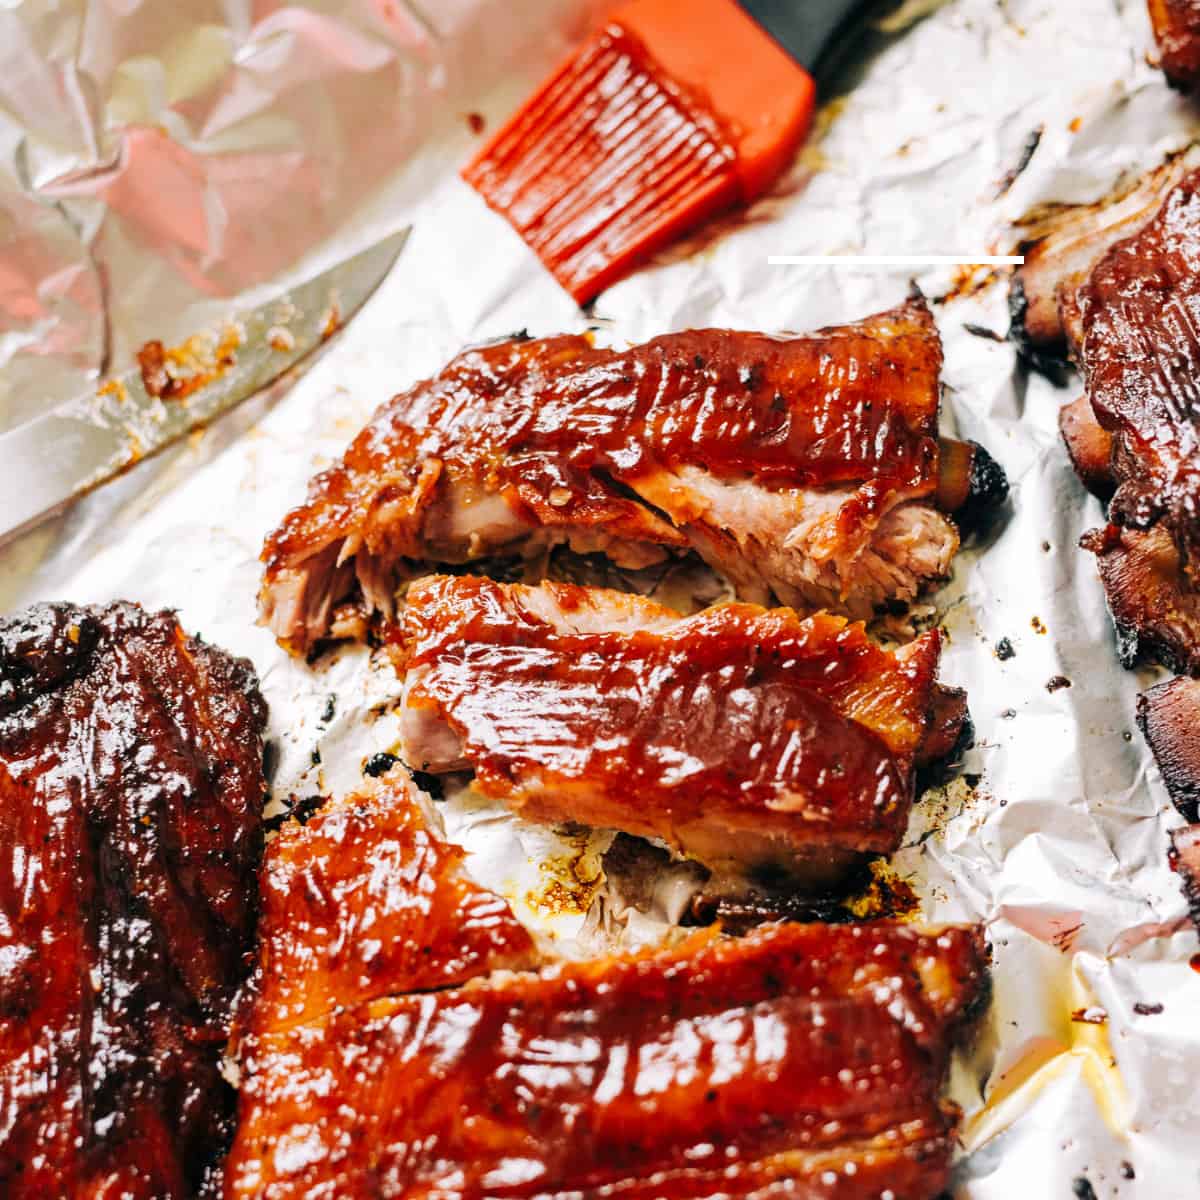 barbeque ribs on white paper with orange basting brush with barbecue sauce on it